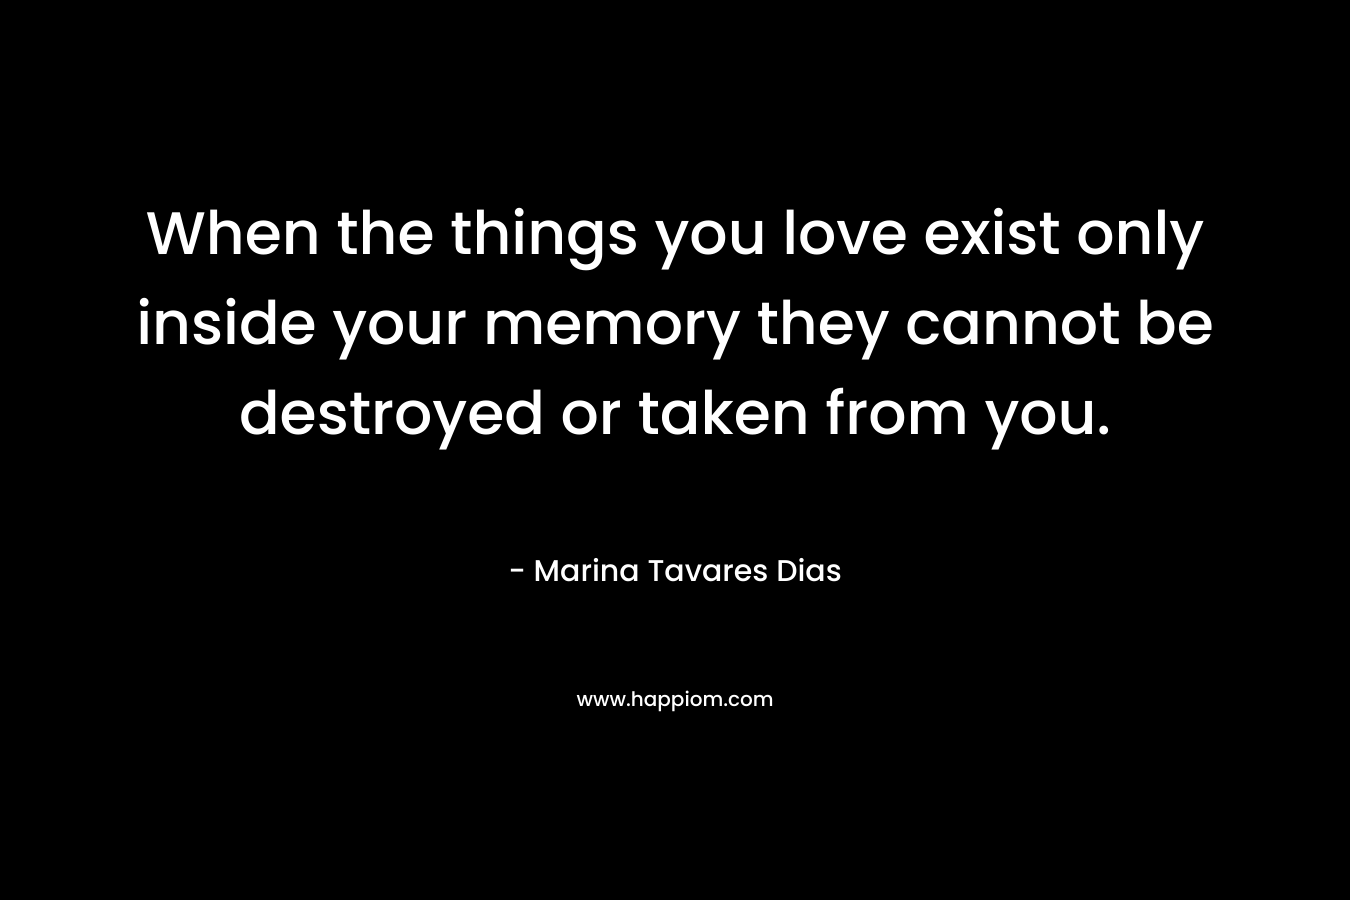 When the things you love exist only inside your memory they cannot be destroyed or taken from you. – Marina Tavares Dias